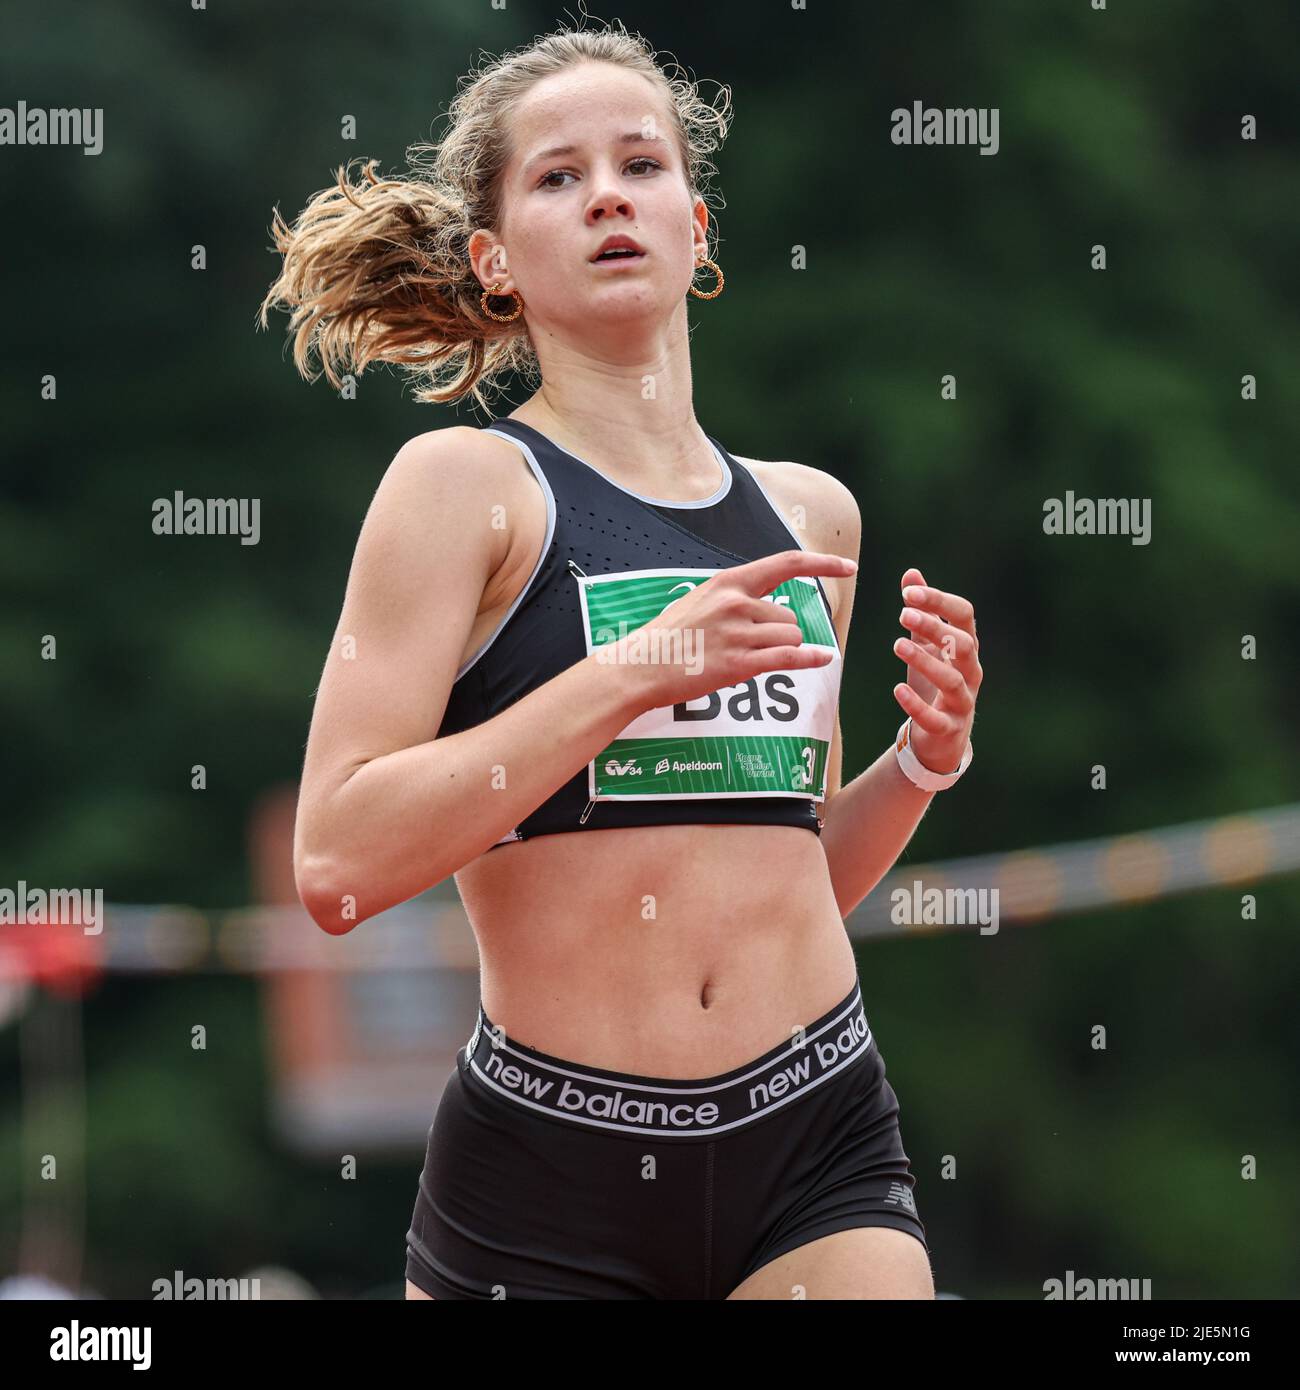 APELDOORN, NETHERLANDS - JUNE 25: Yoni Bas of The Netherlands competing in  the Women's 200m series of the ASICS NK Atletiek 2022 - Day 2 at AV '34 on  June 25, 2022